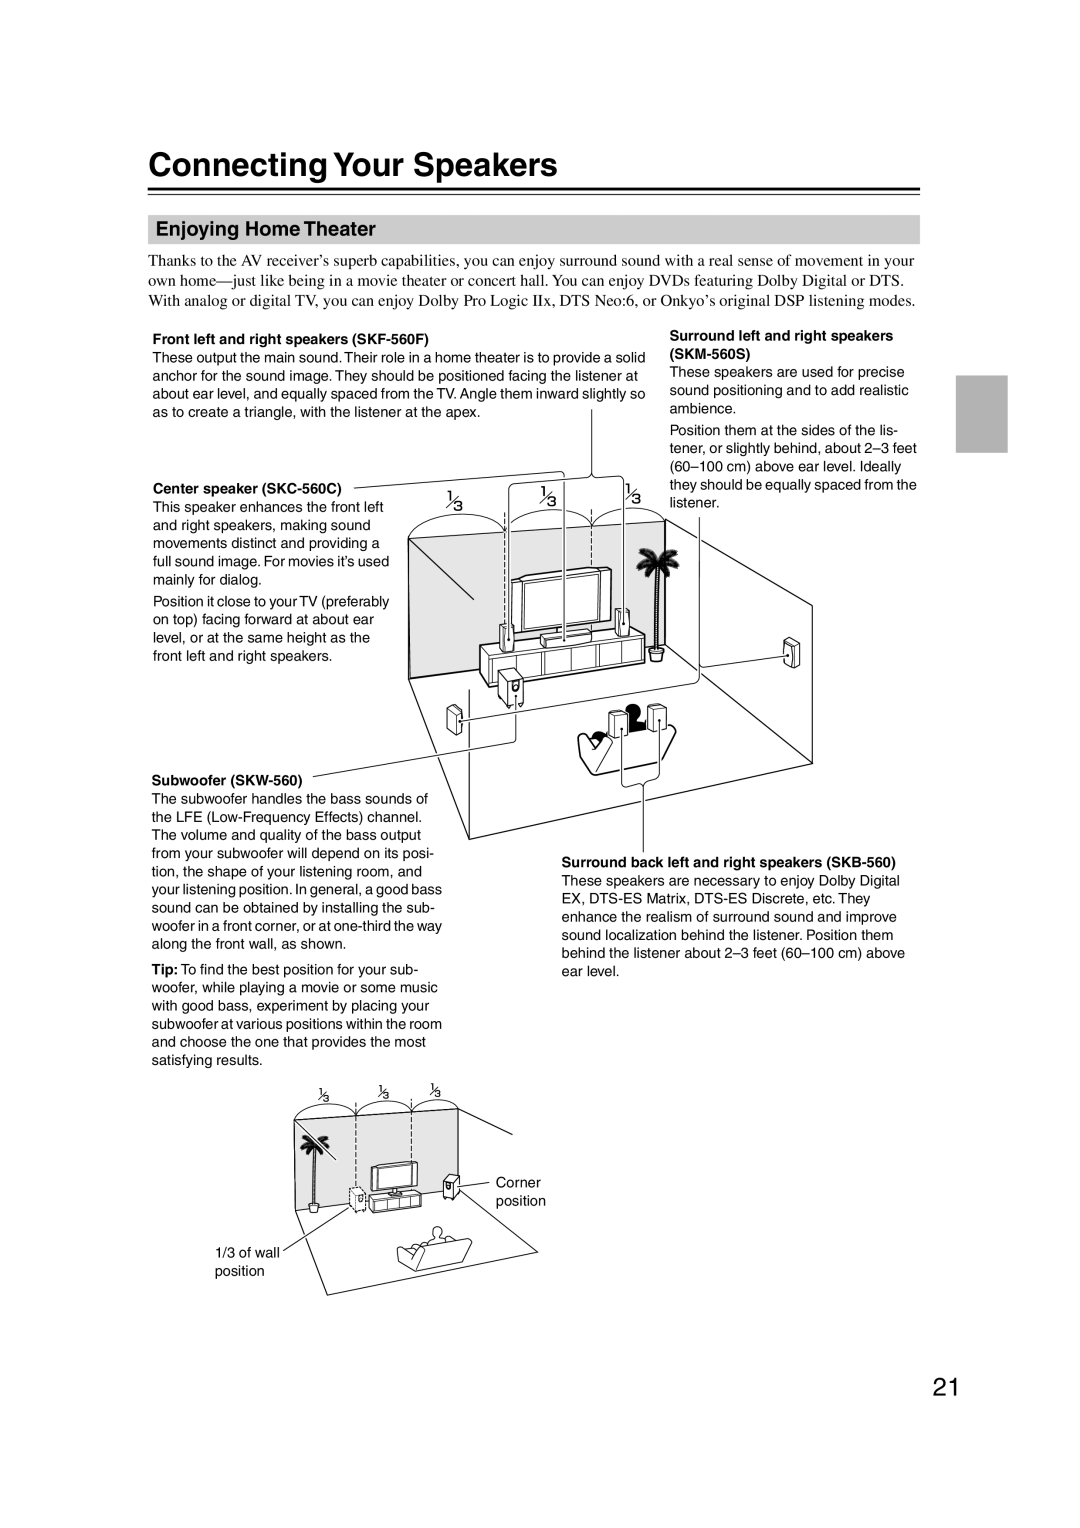 Onkyo HT-S5100 instruction manual Connecting Your Speakers, Enjoying Home Theater 